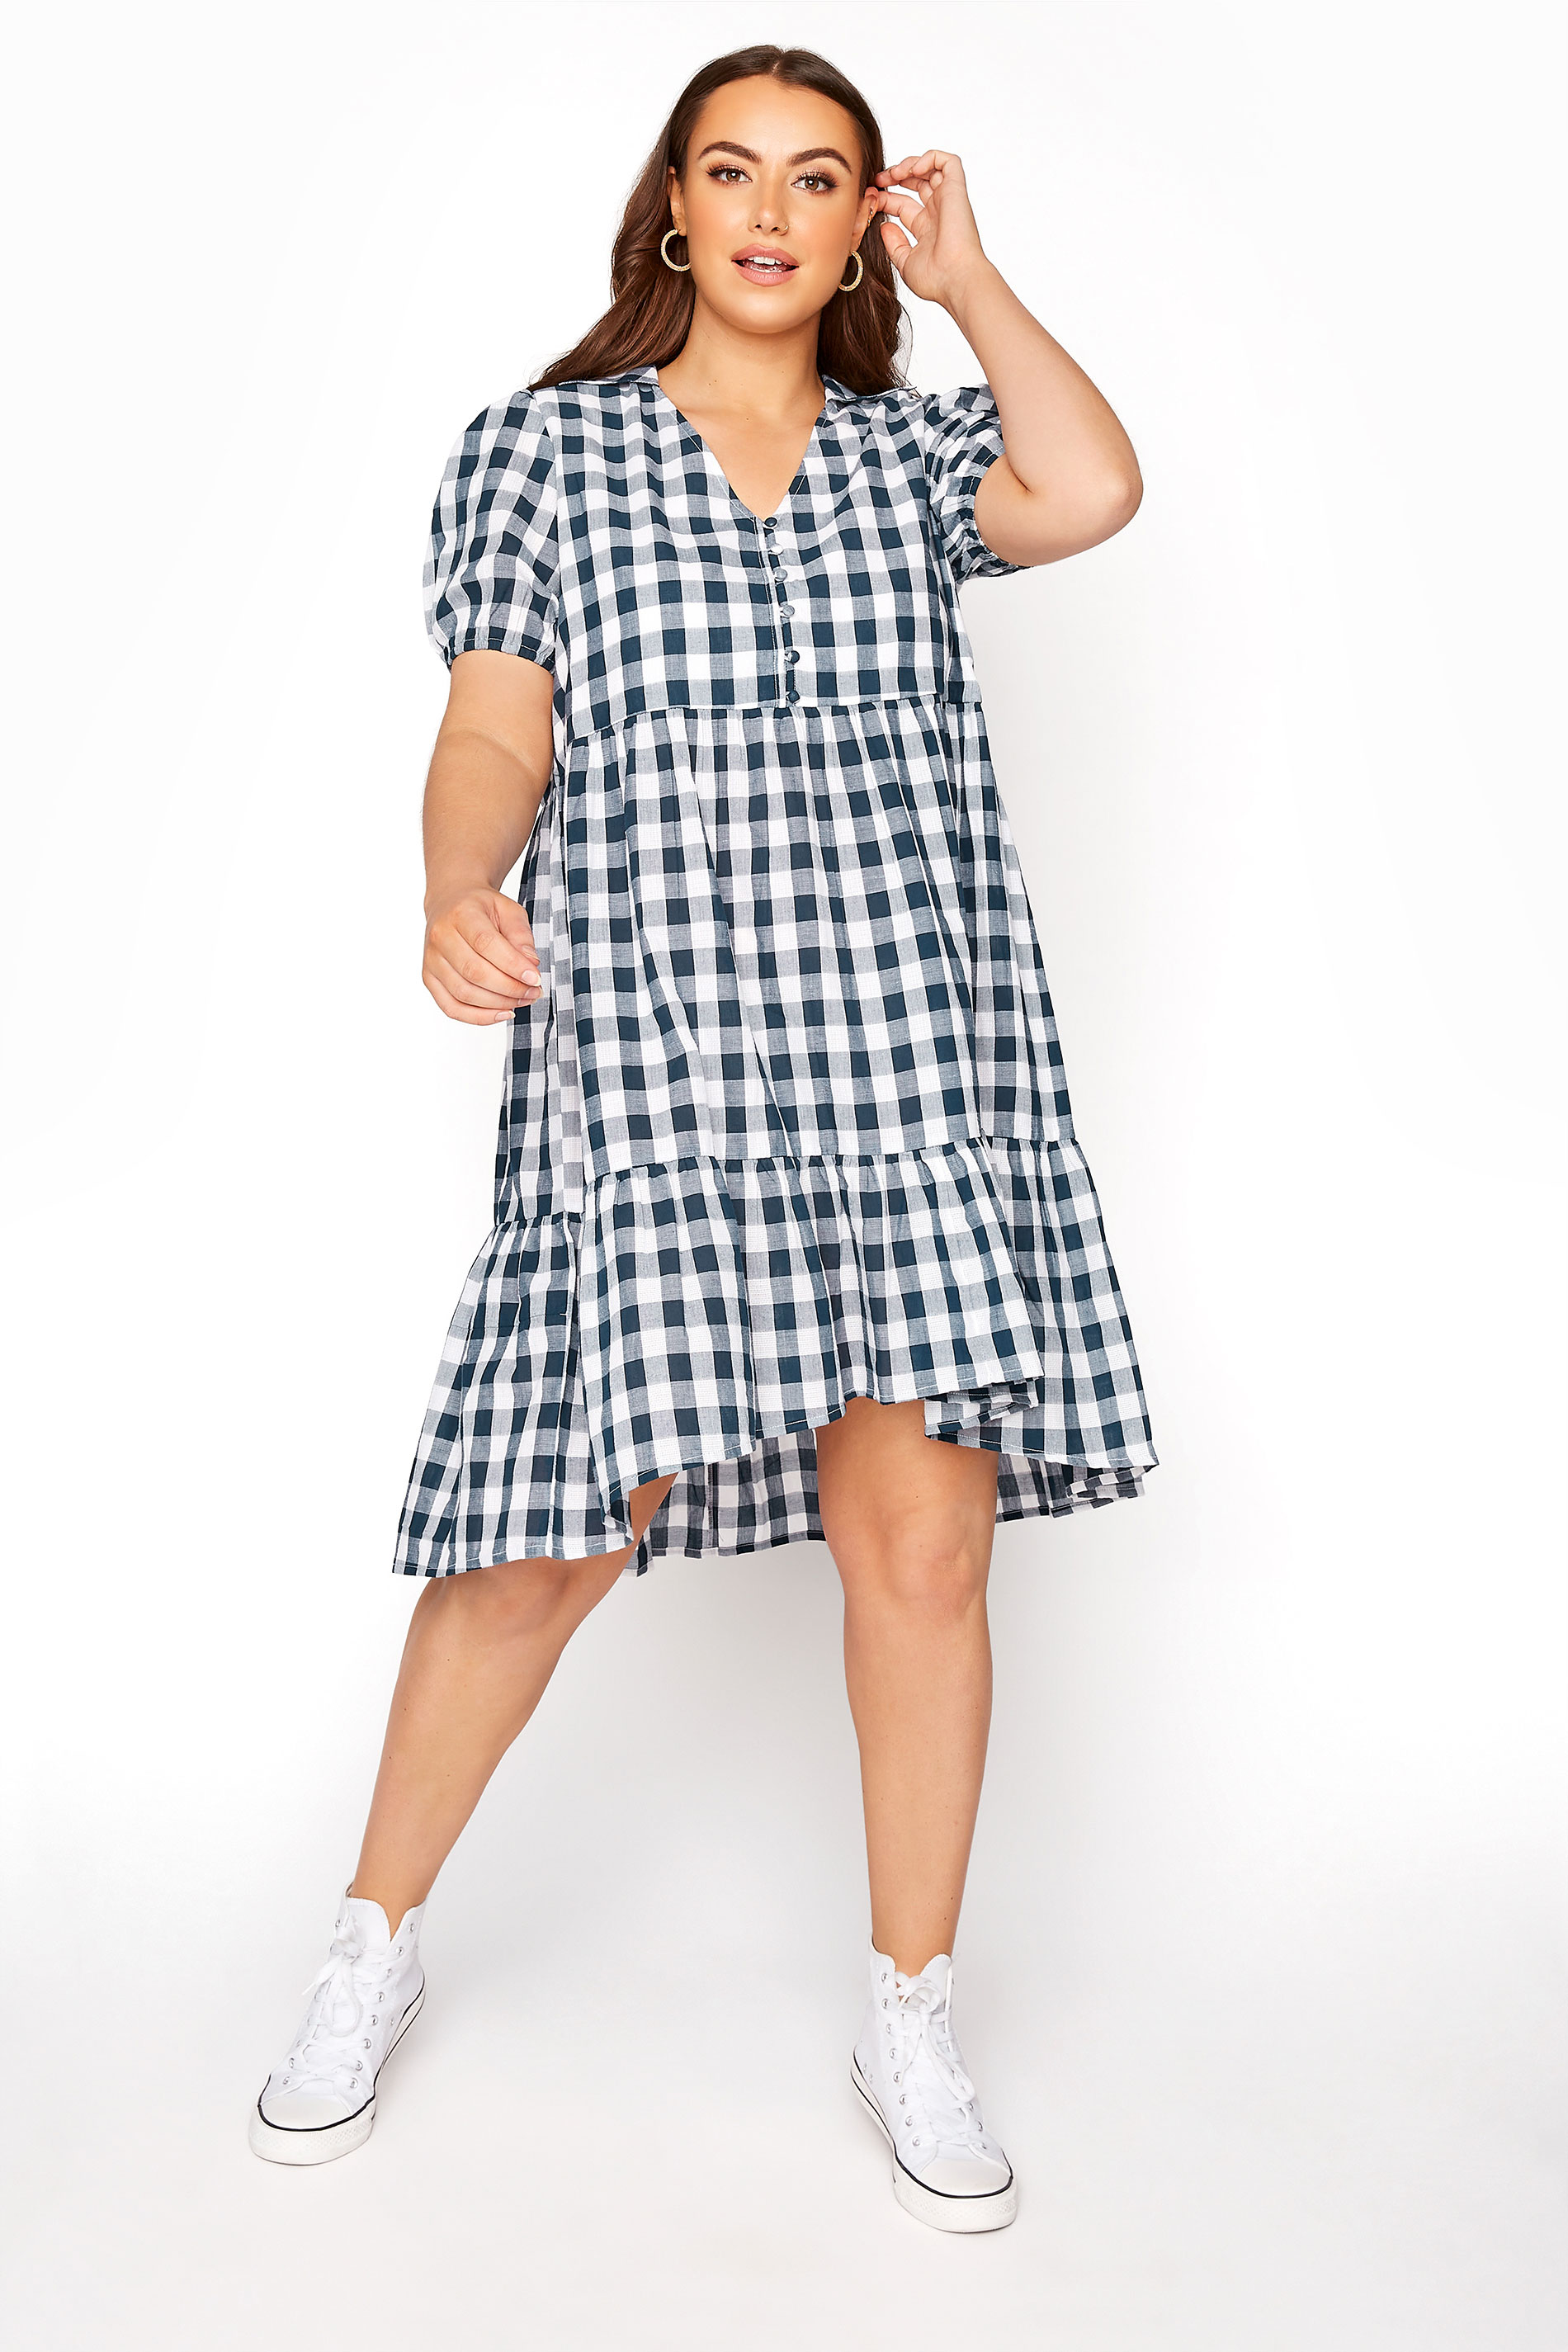 LIMITED COLLECTION Denim Blue Gingham Smock Dress | Yours Clothing